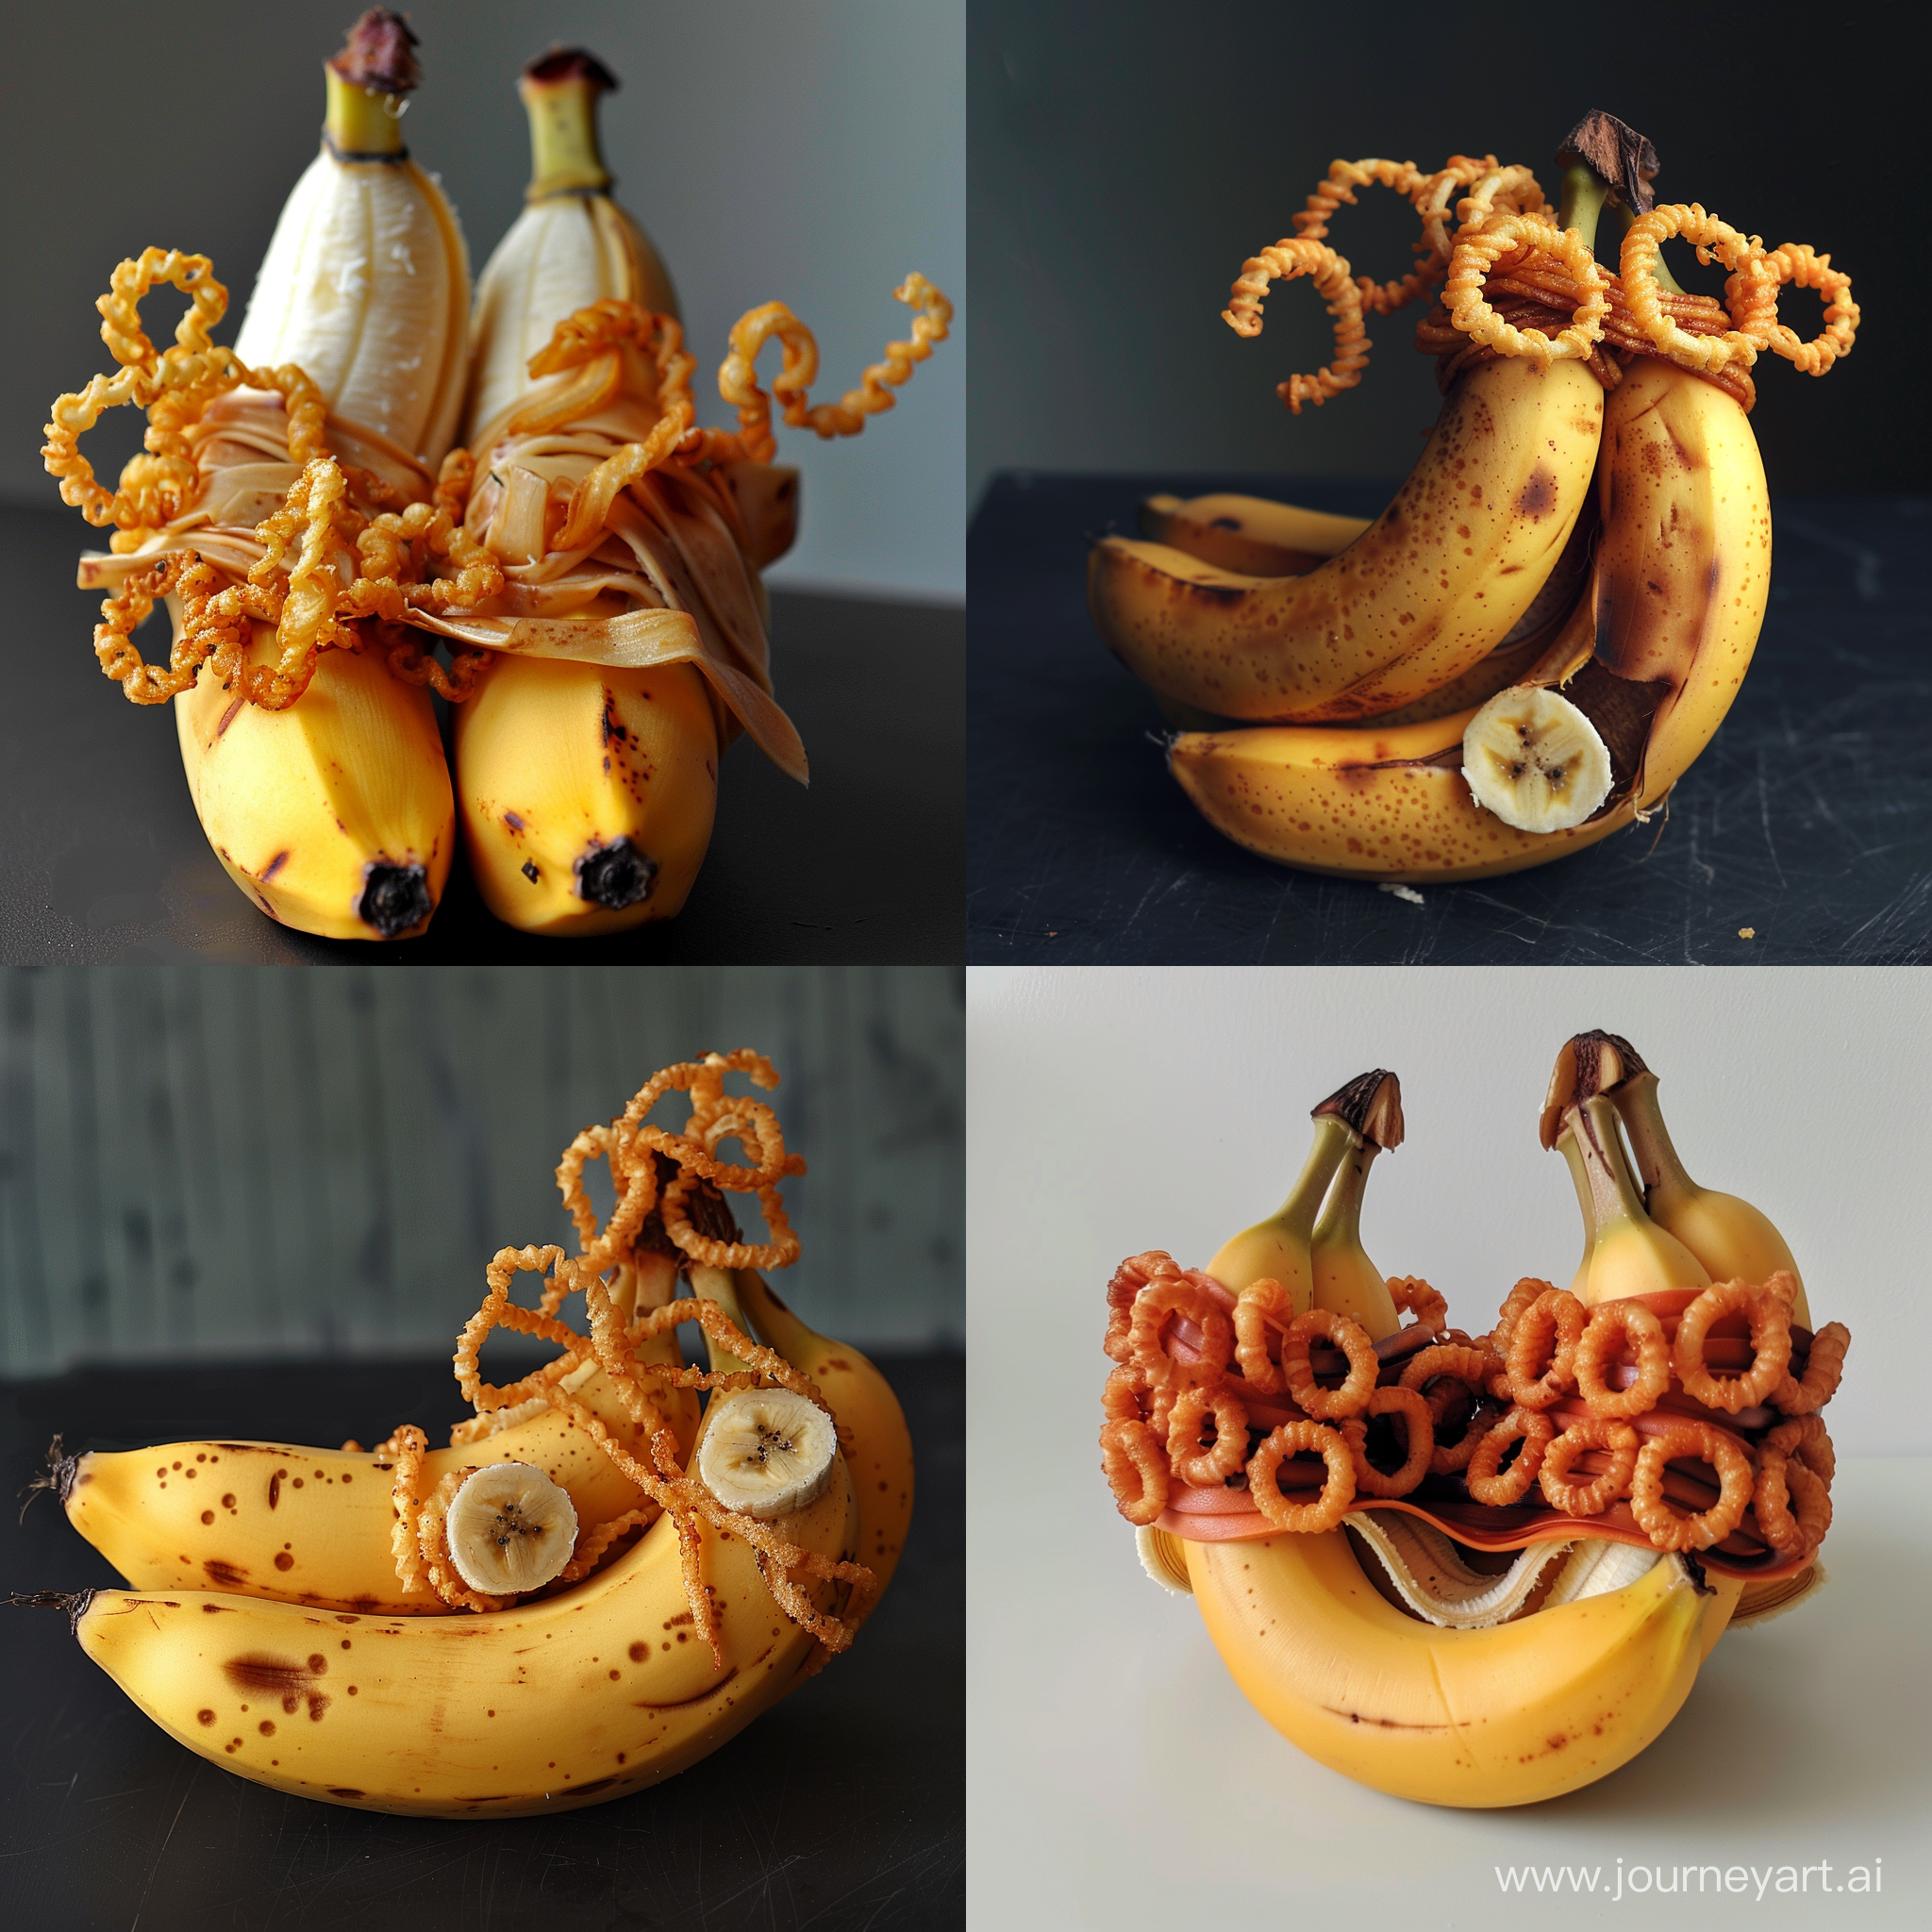 two bananas touching each other with curly fries wrapped around them